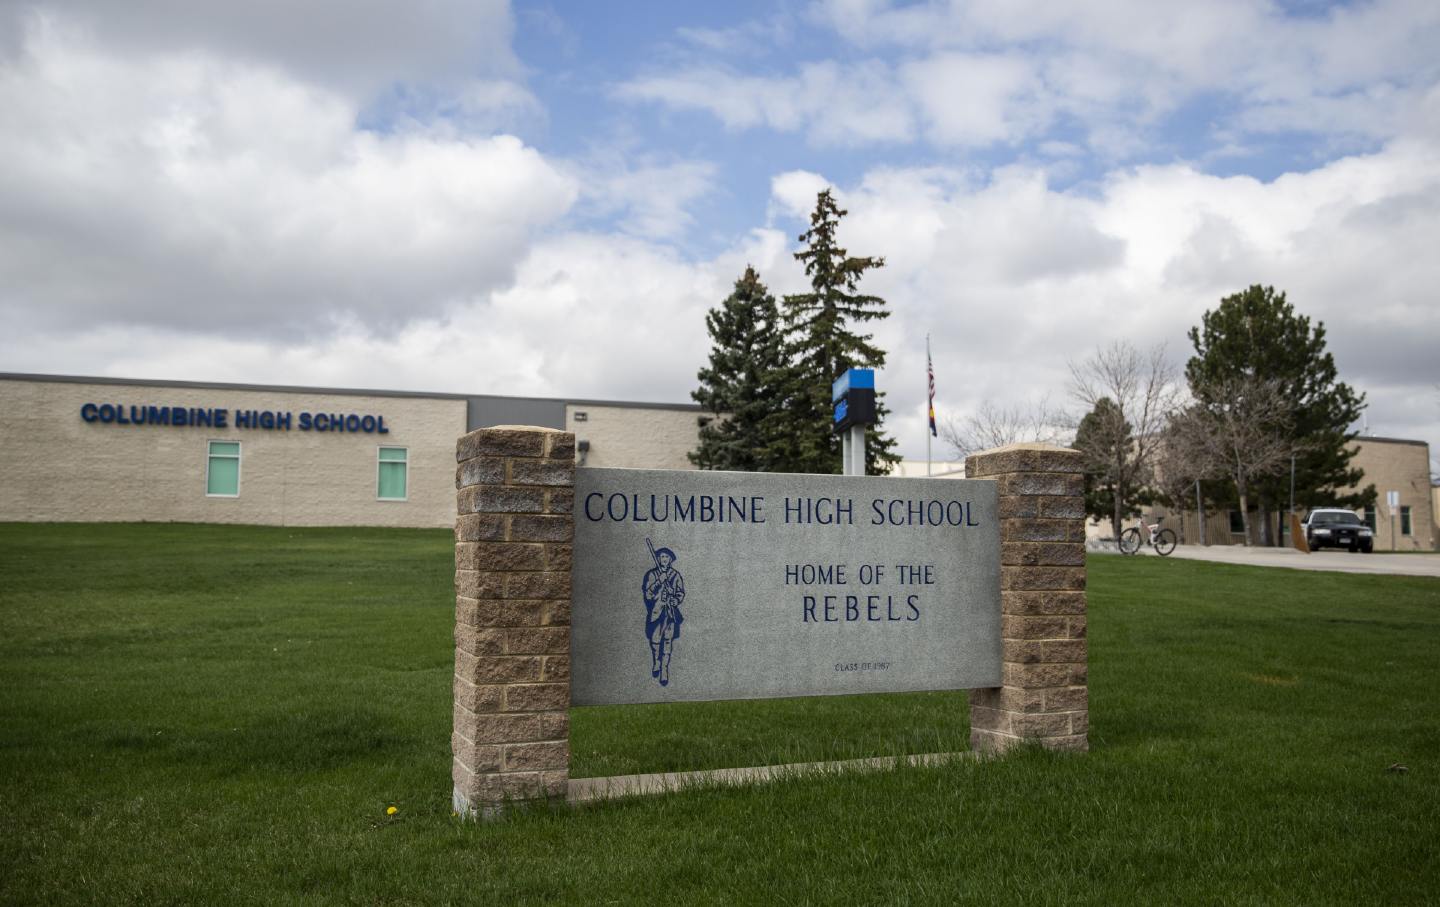 Police patrol outside Columbine High School on April 17, 2019 in Littleton, Colorado, the site of the deadly school shooting in 1999.